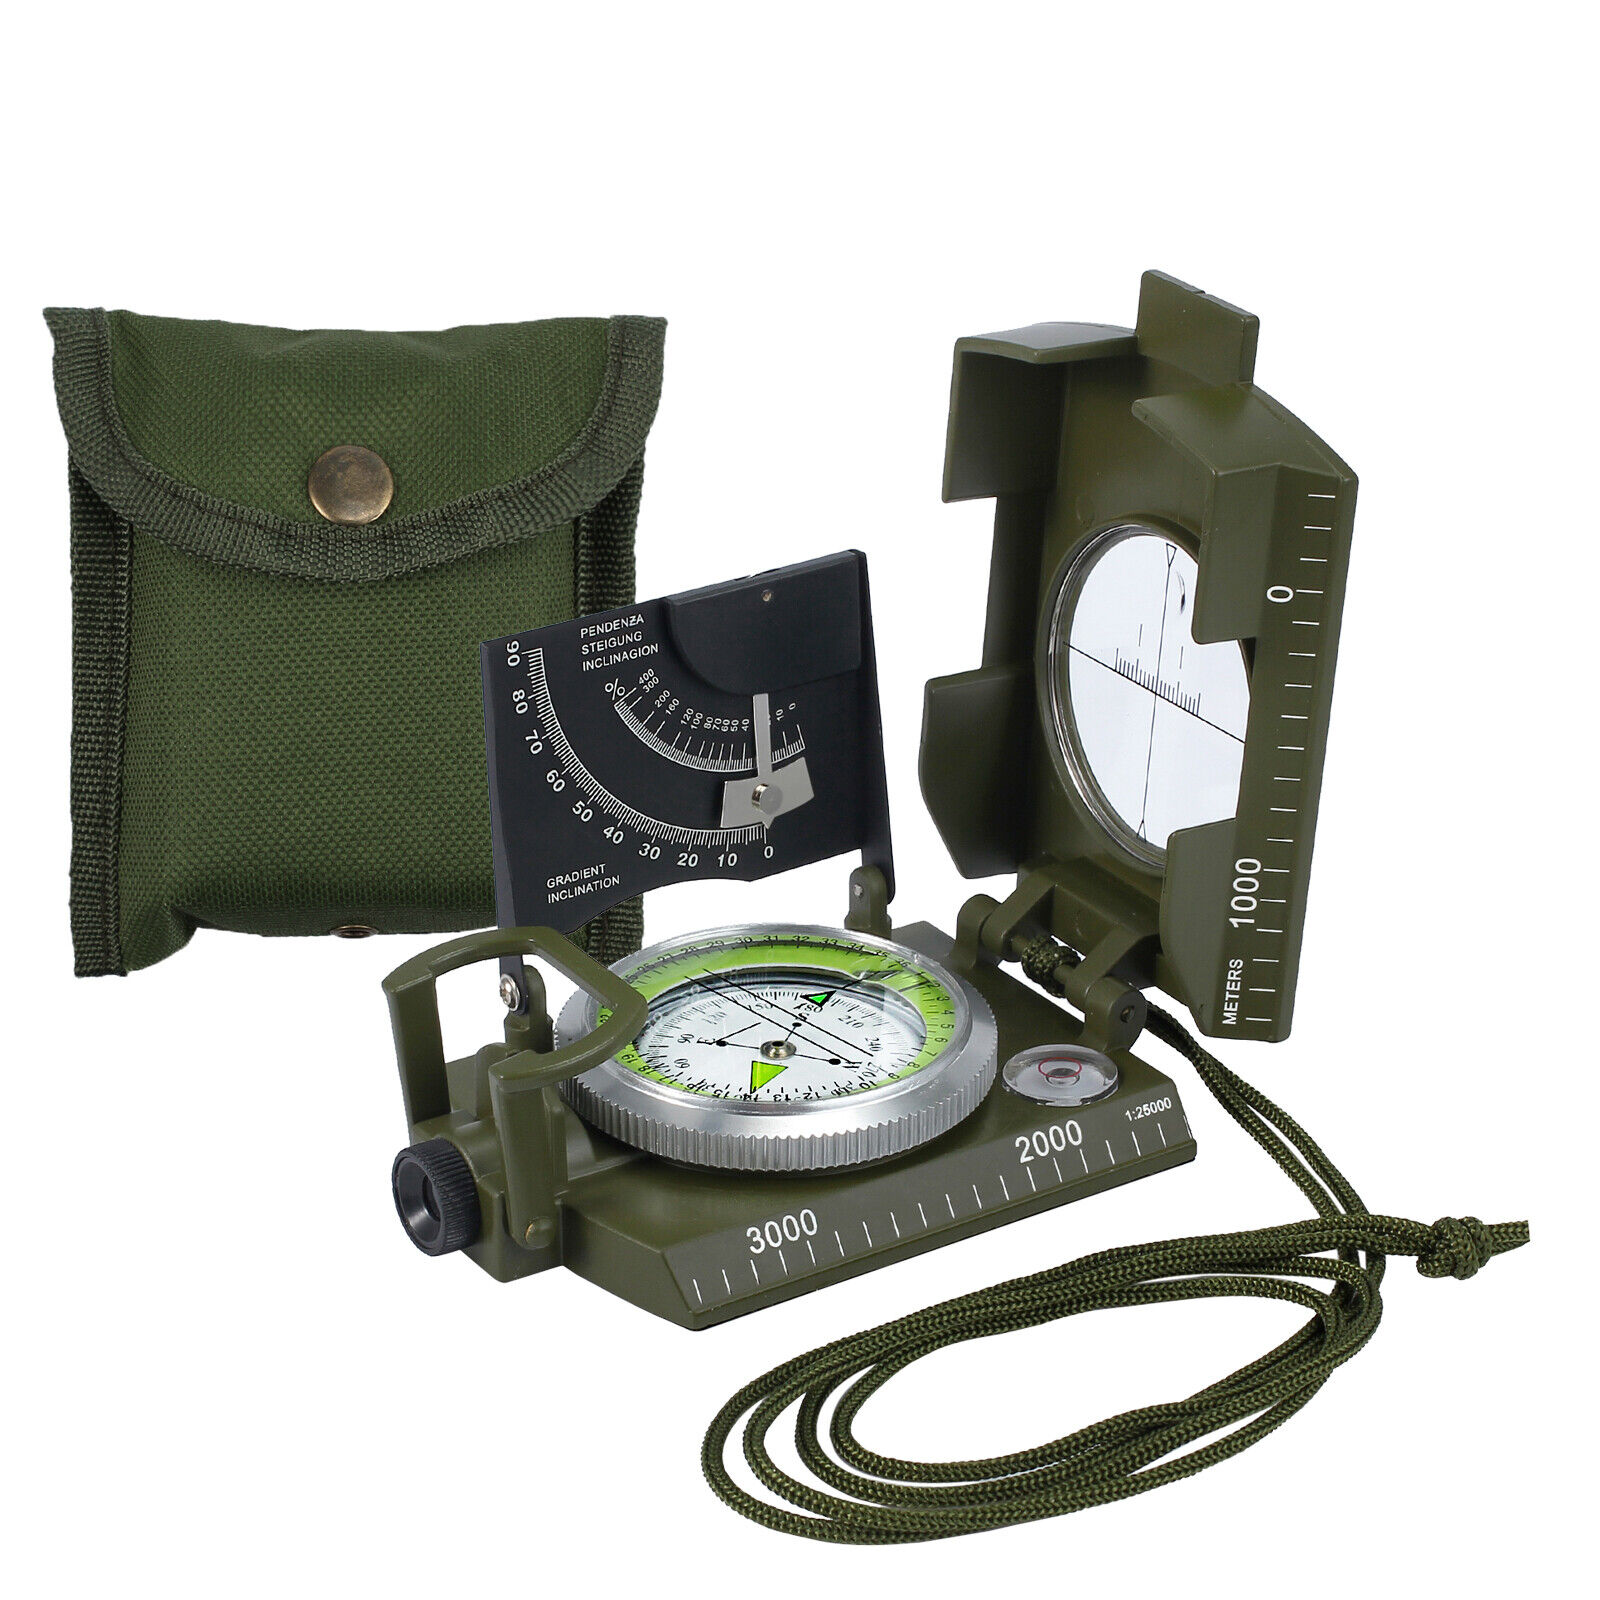 Military Lensatic Sighting Compass Clinometer Outdoor Camping Hiking Survival